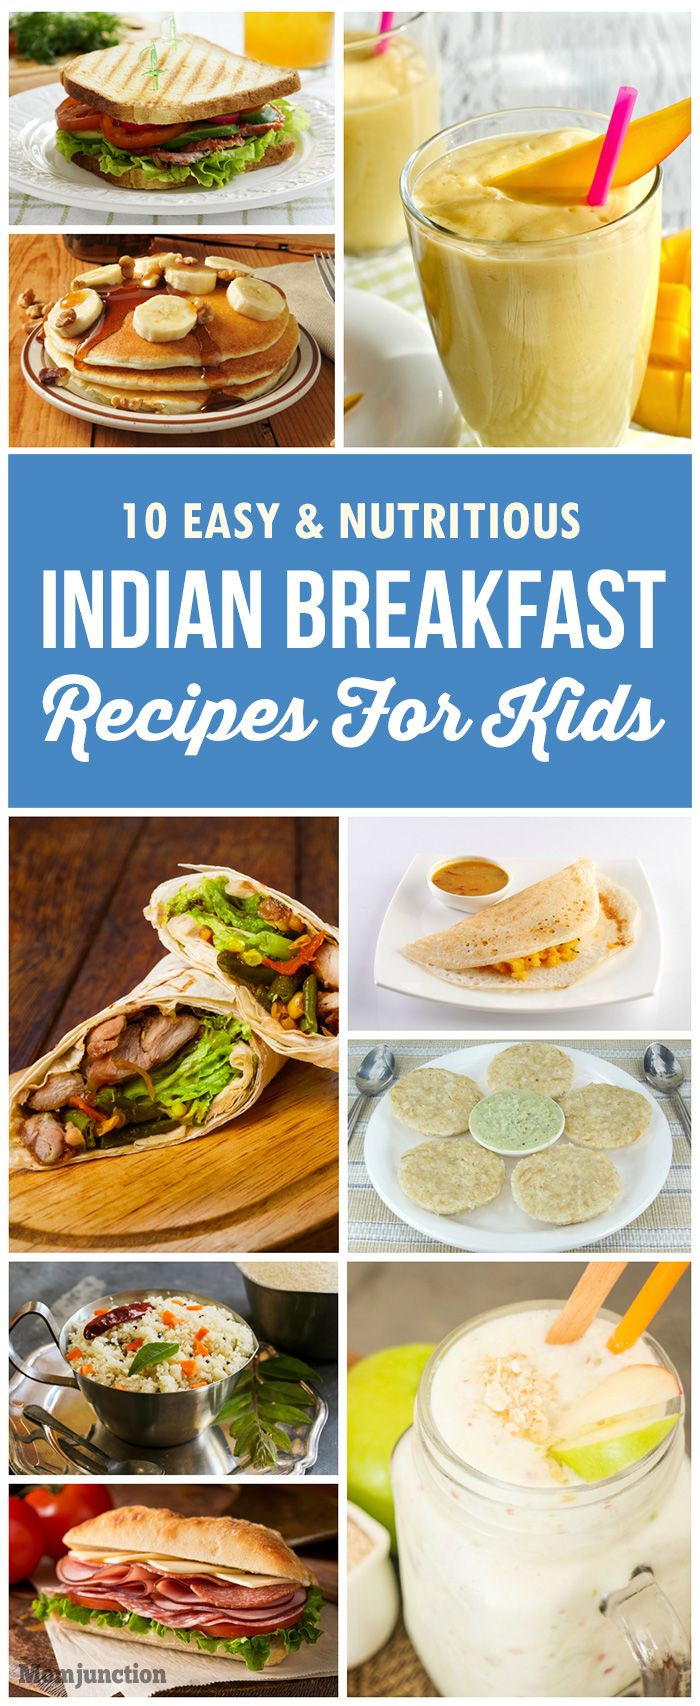 Easy Indian Recipes For Kids
 23 Tasty And Healthy Indian Breakfast Recipes For Kids